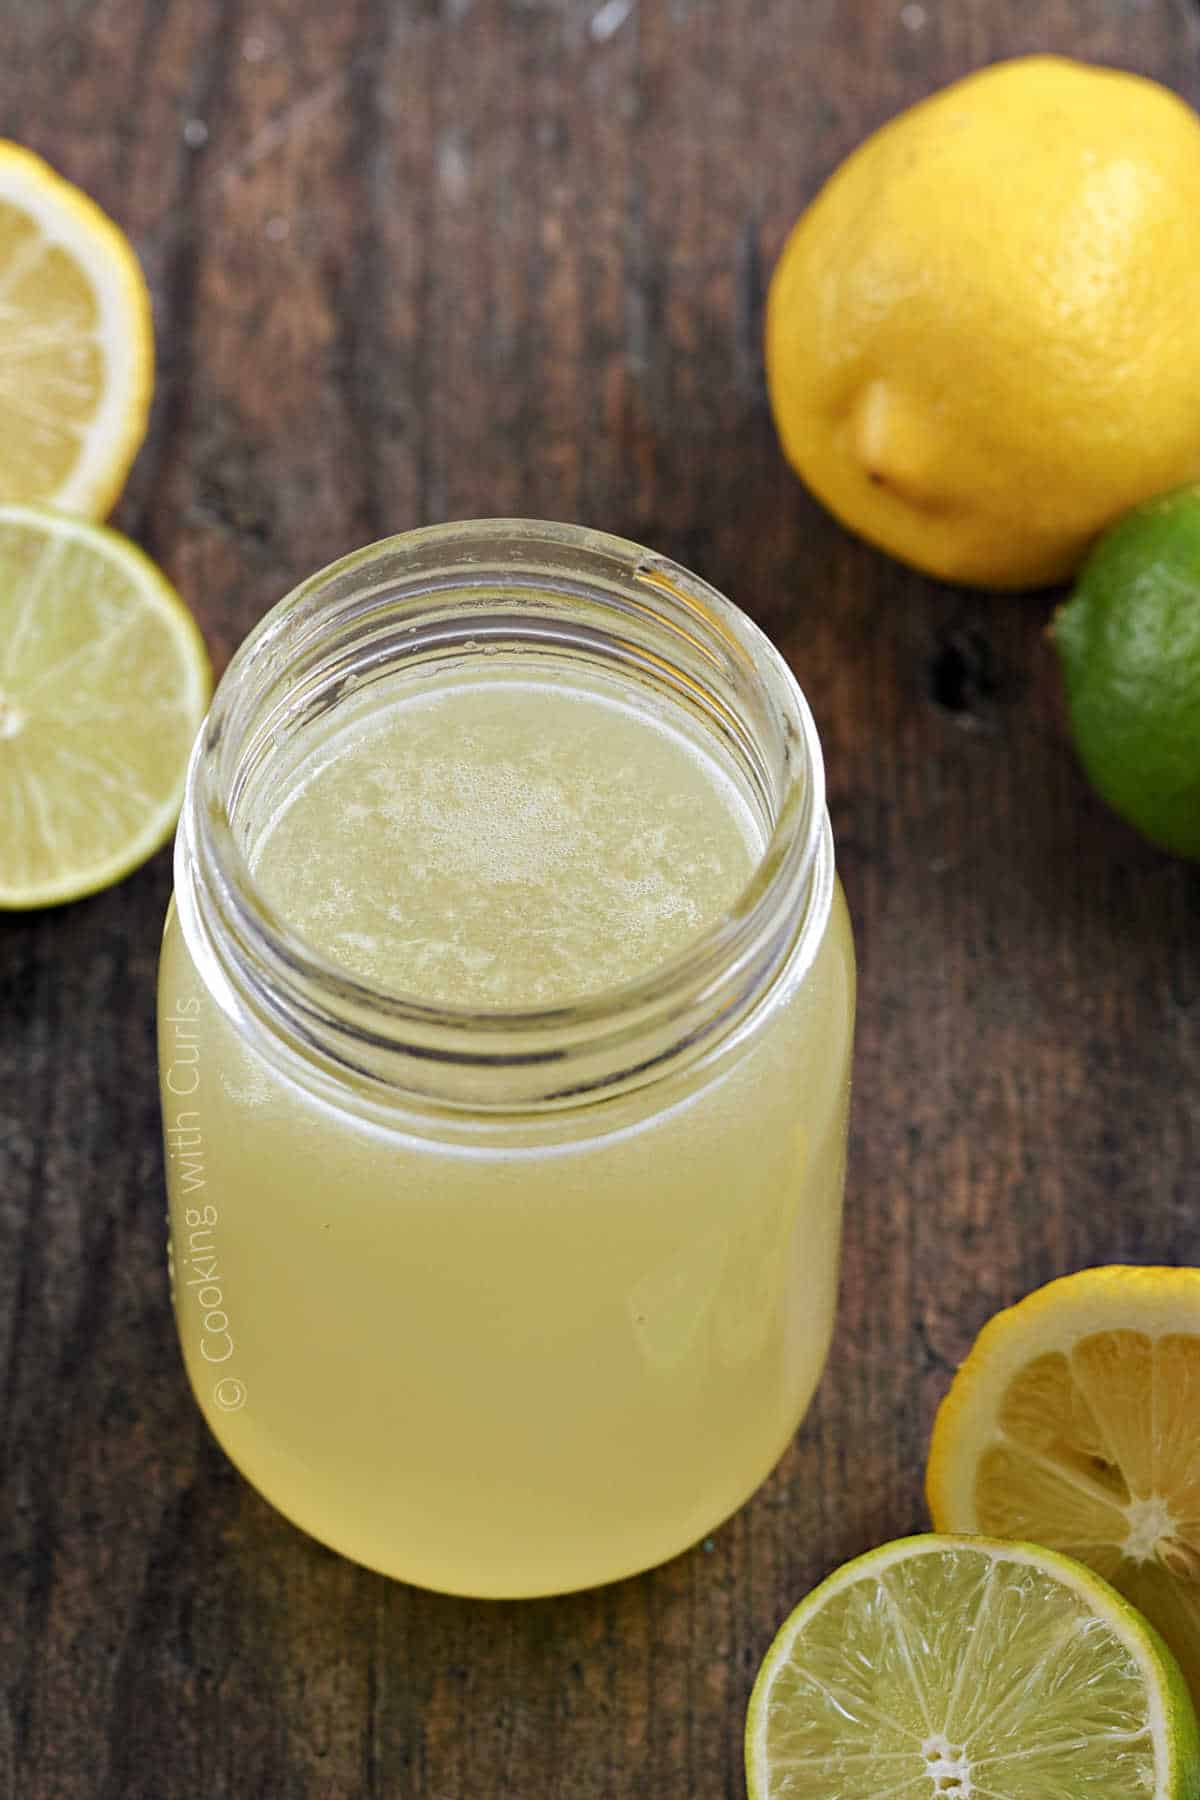 Sweet and sour mix in a mason jar surrounded by lemons and limes.